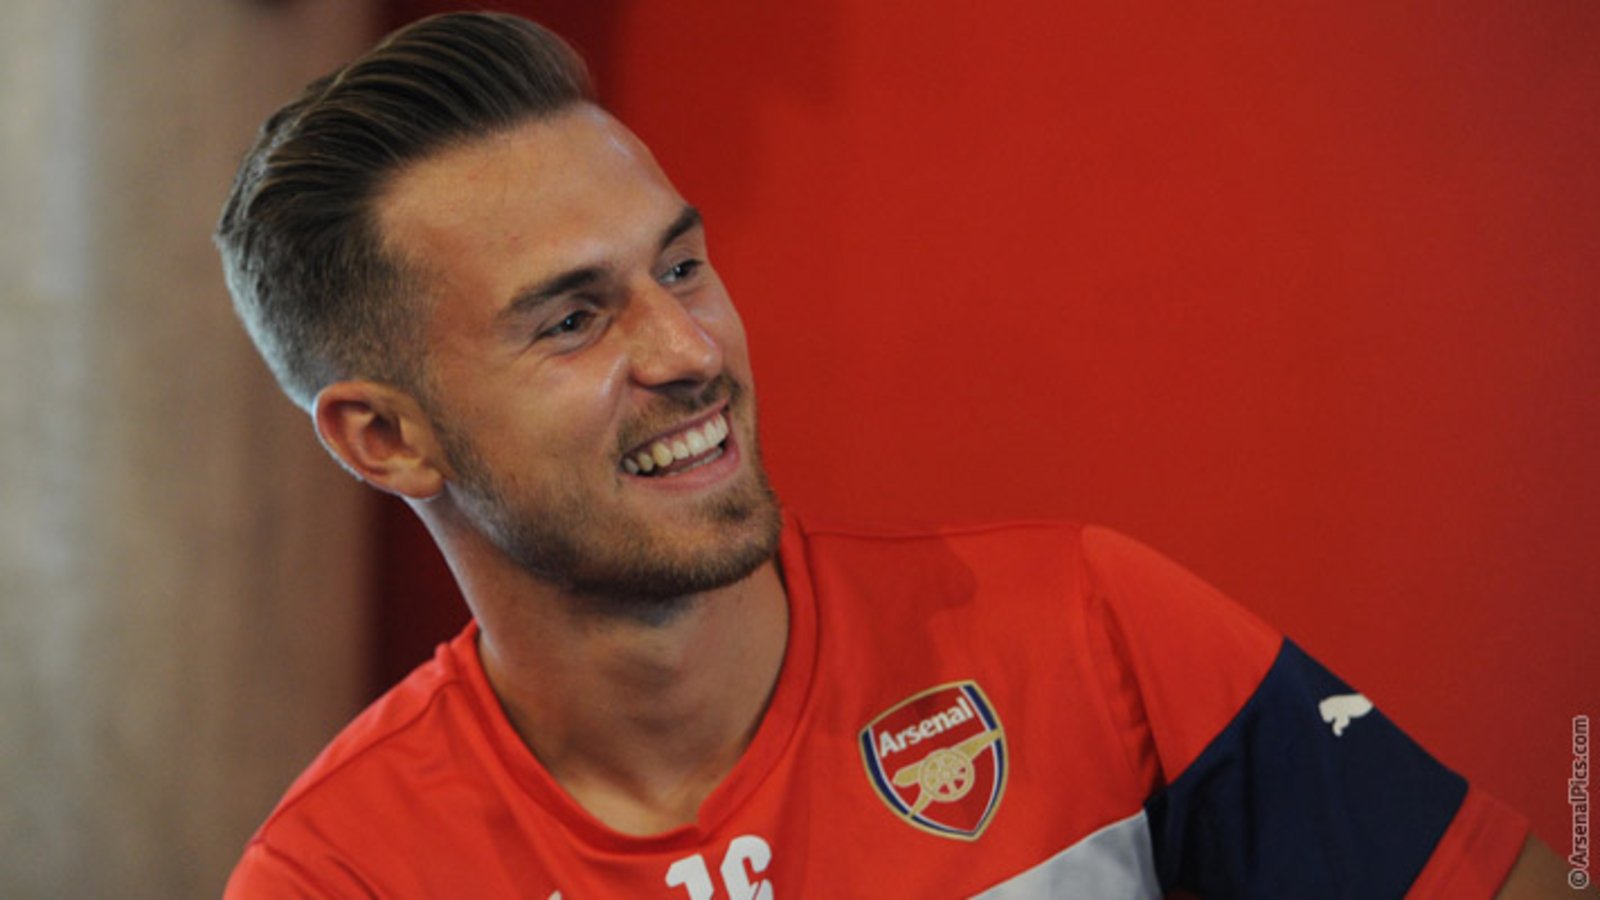 Ramsey - We are all in this together | News | Arsenal.com